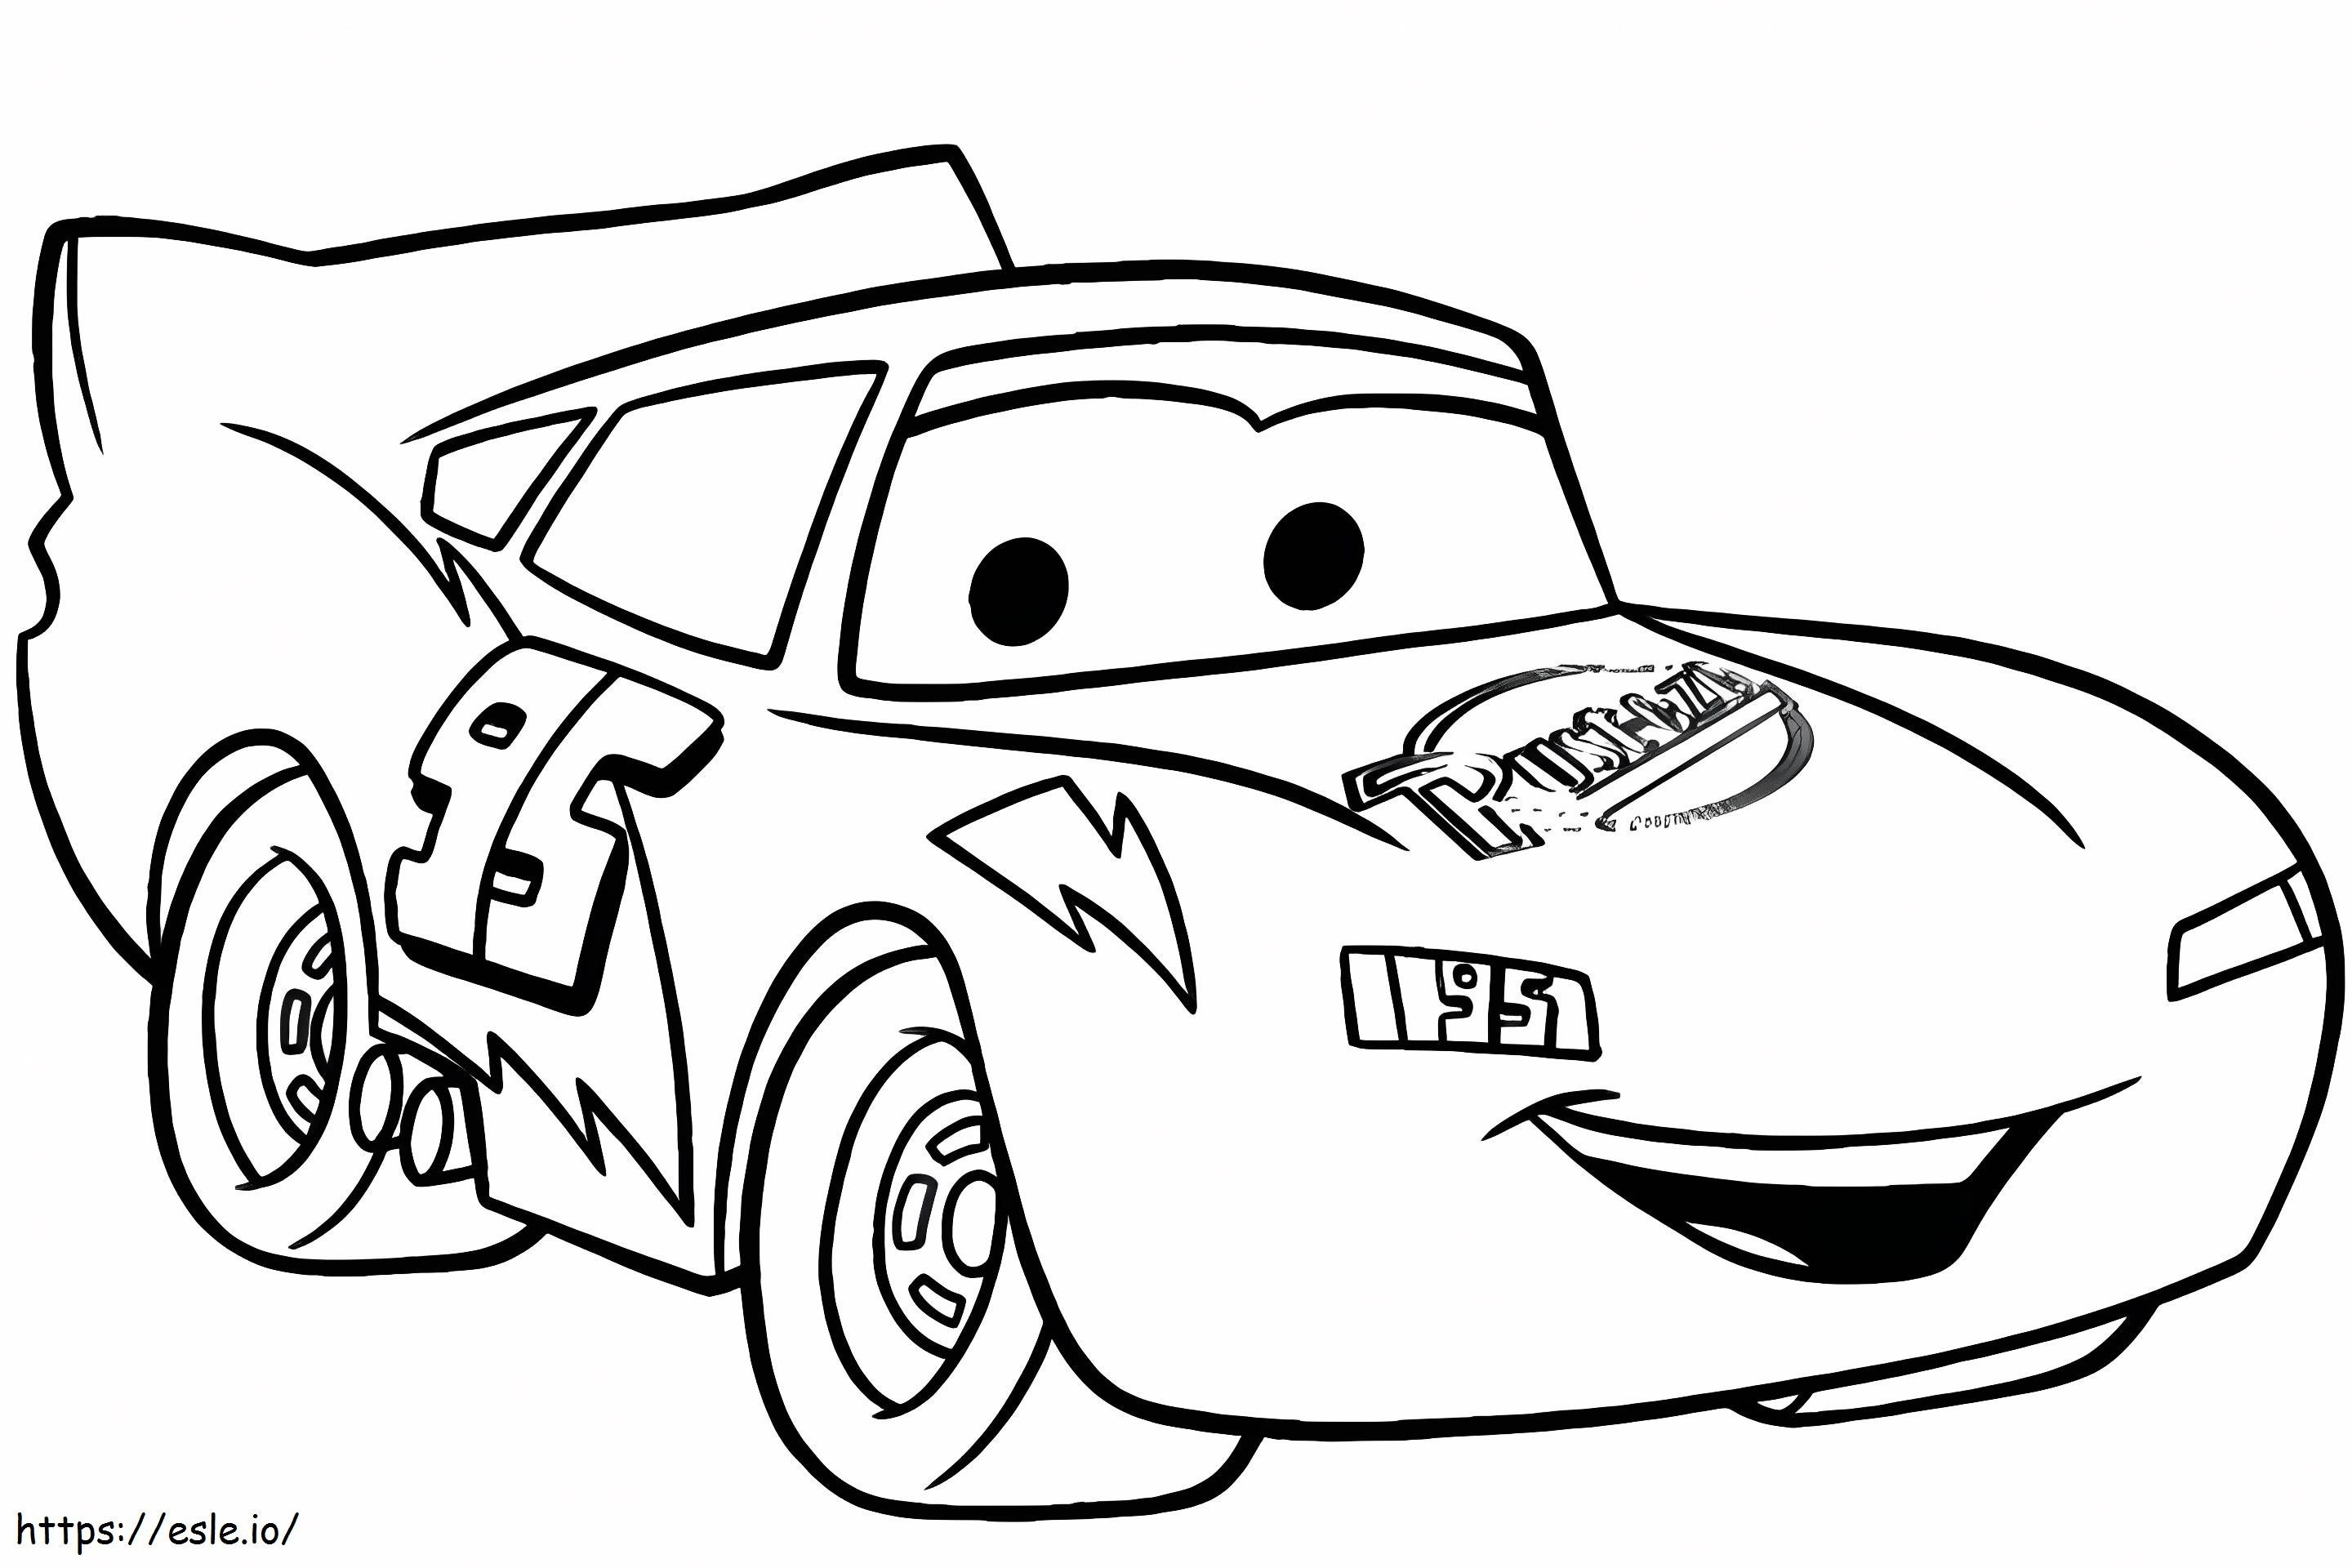 1526131934 Lightning Mcqueen A4 coloring page